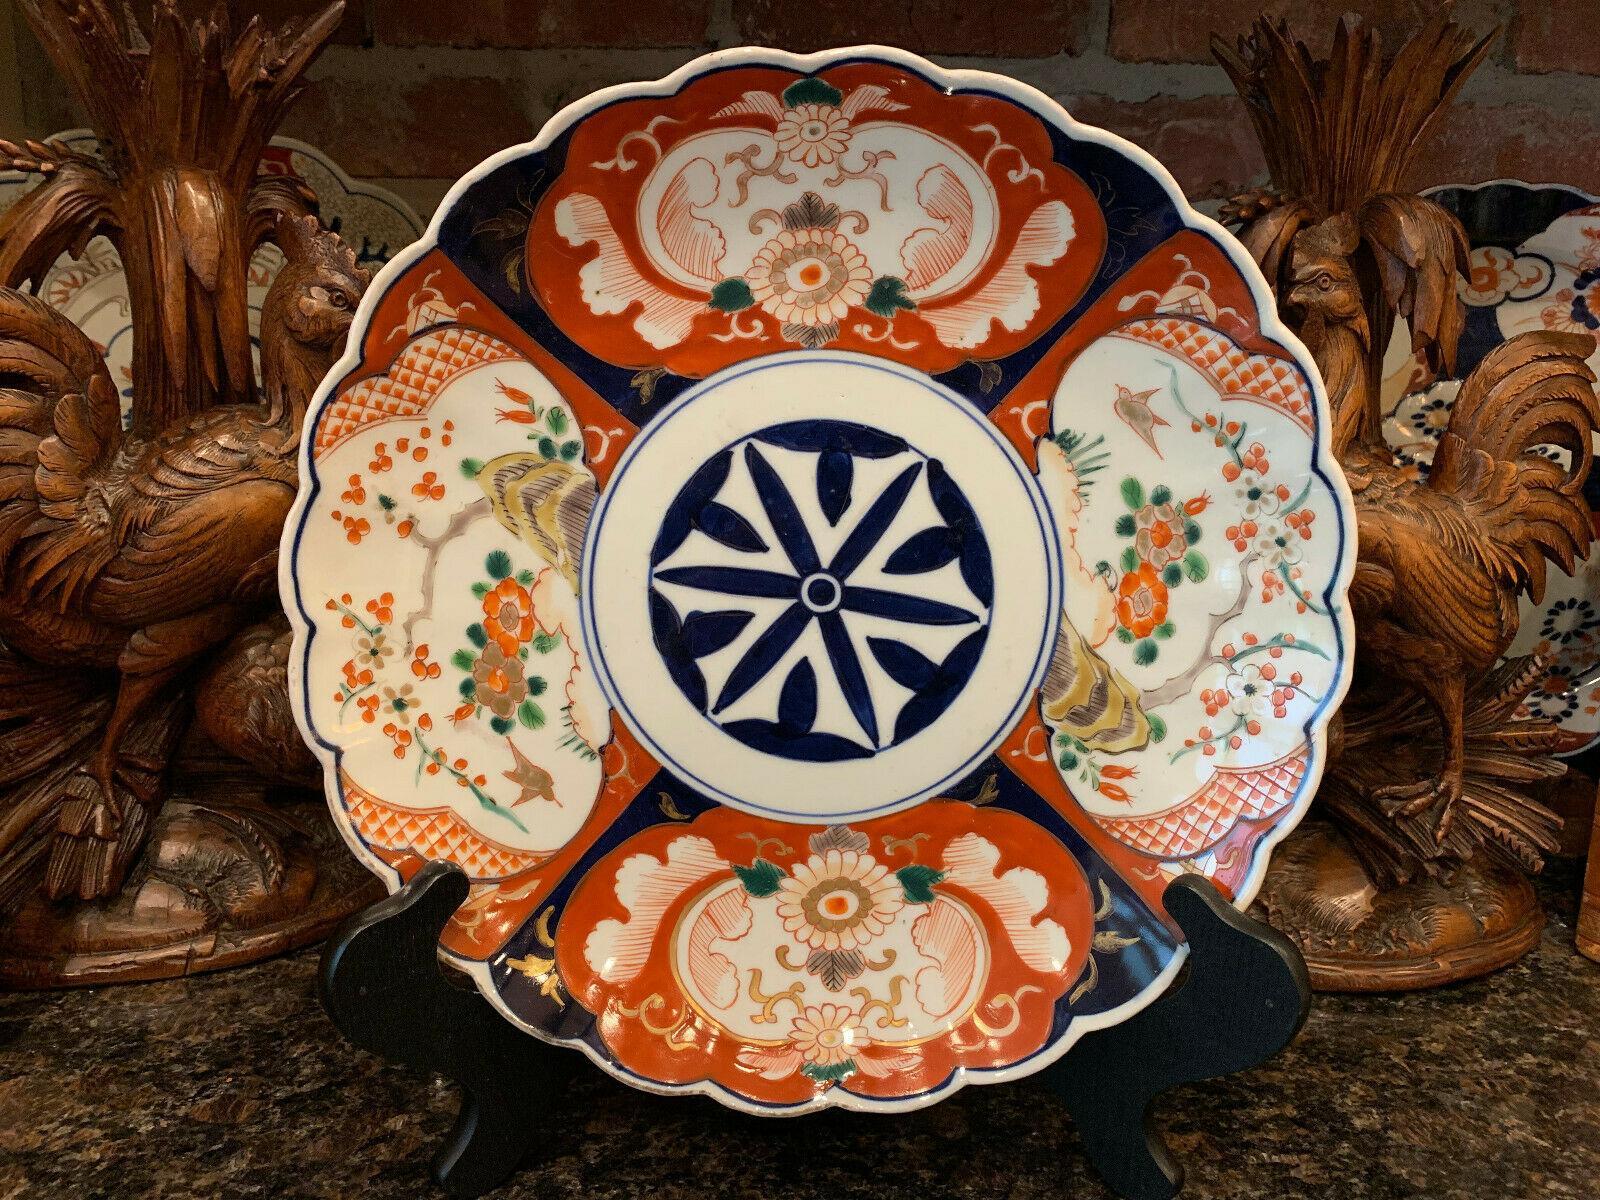 ~Direct from England~
A gorgeous large antique charger, deep with scalloped edge, hand painted in classic IMARI patterns.
~ Traditional Imari red, orange-red and deep blue decor~
~On our last buying trip to Europe, we purchased a large group of